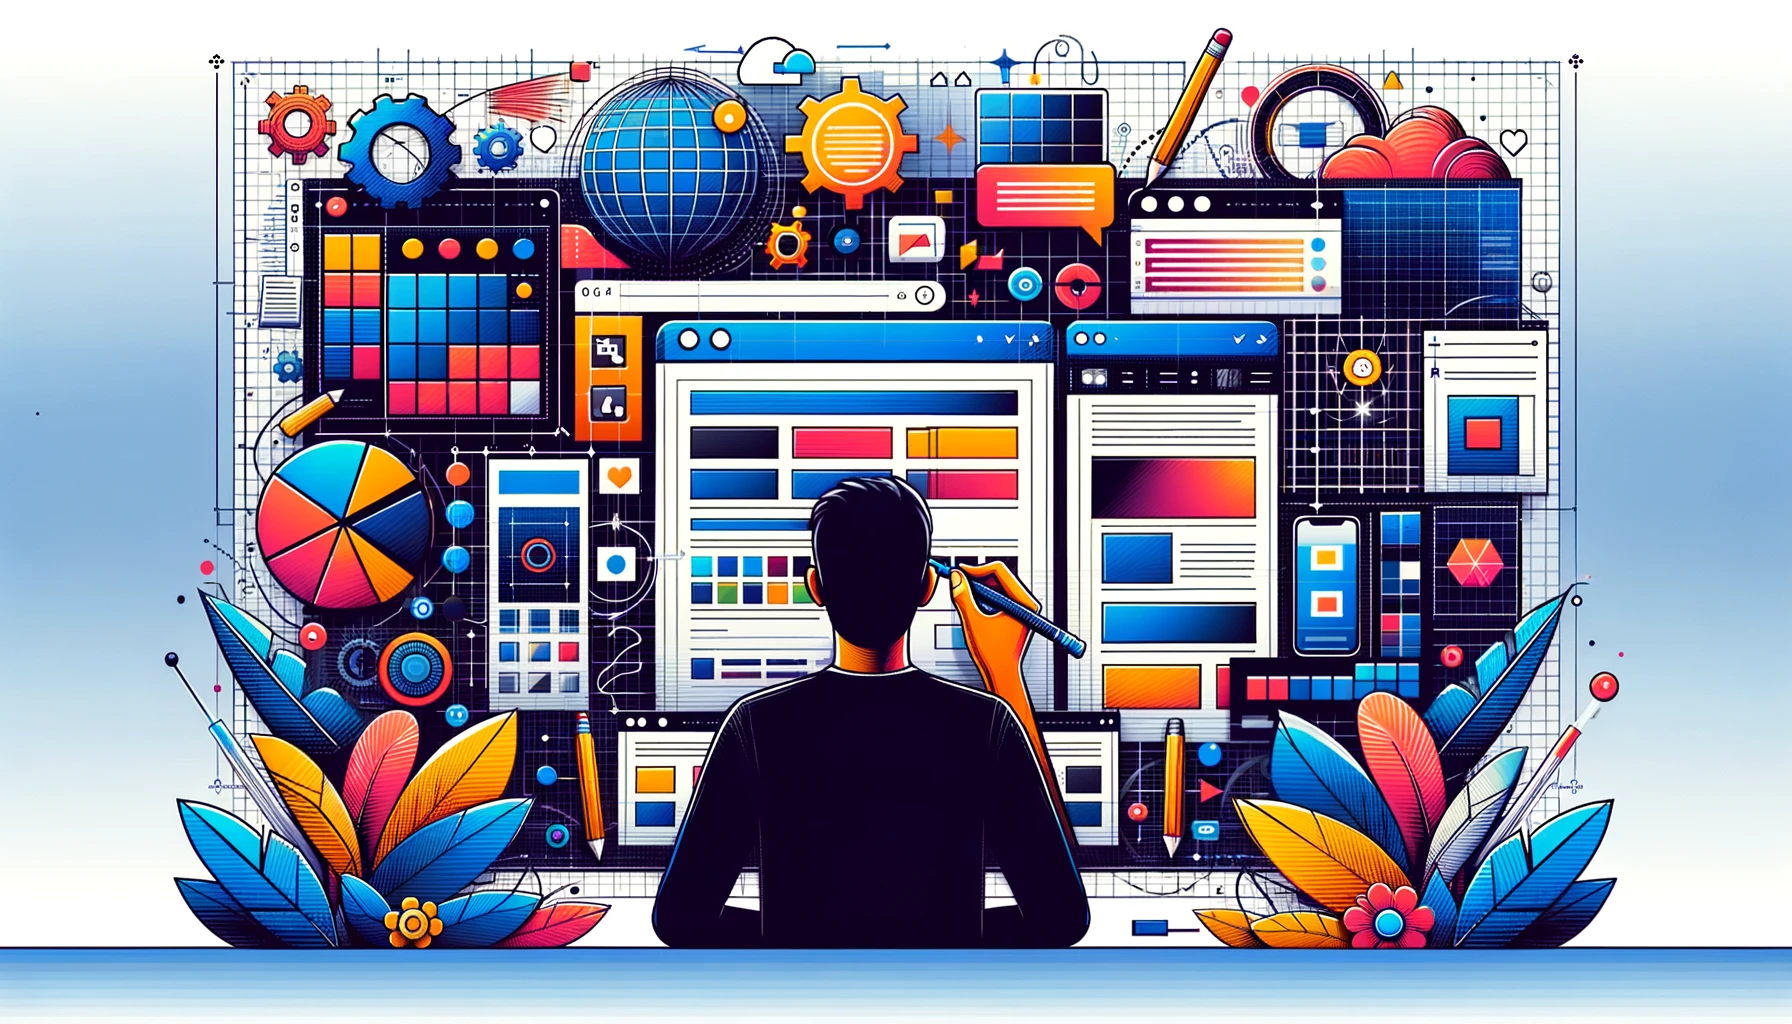 Illustration-of-a-Person-Engaged-in-Web-Design-Process-Surrounded-by-Design-Elements-Color-Palettes-Graphs-Icons-Floral-Accents-Against-Blue-Background